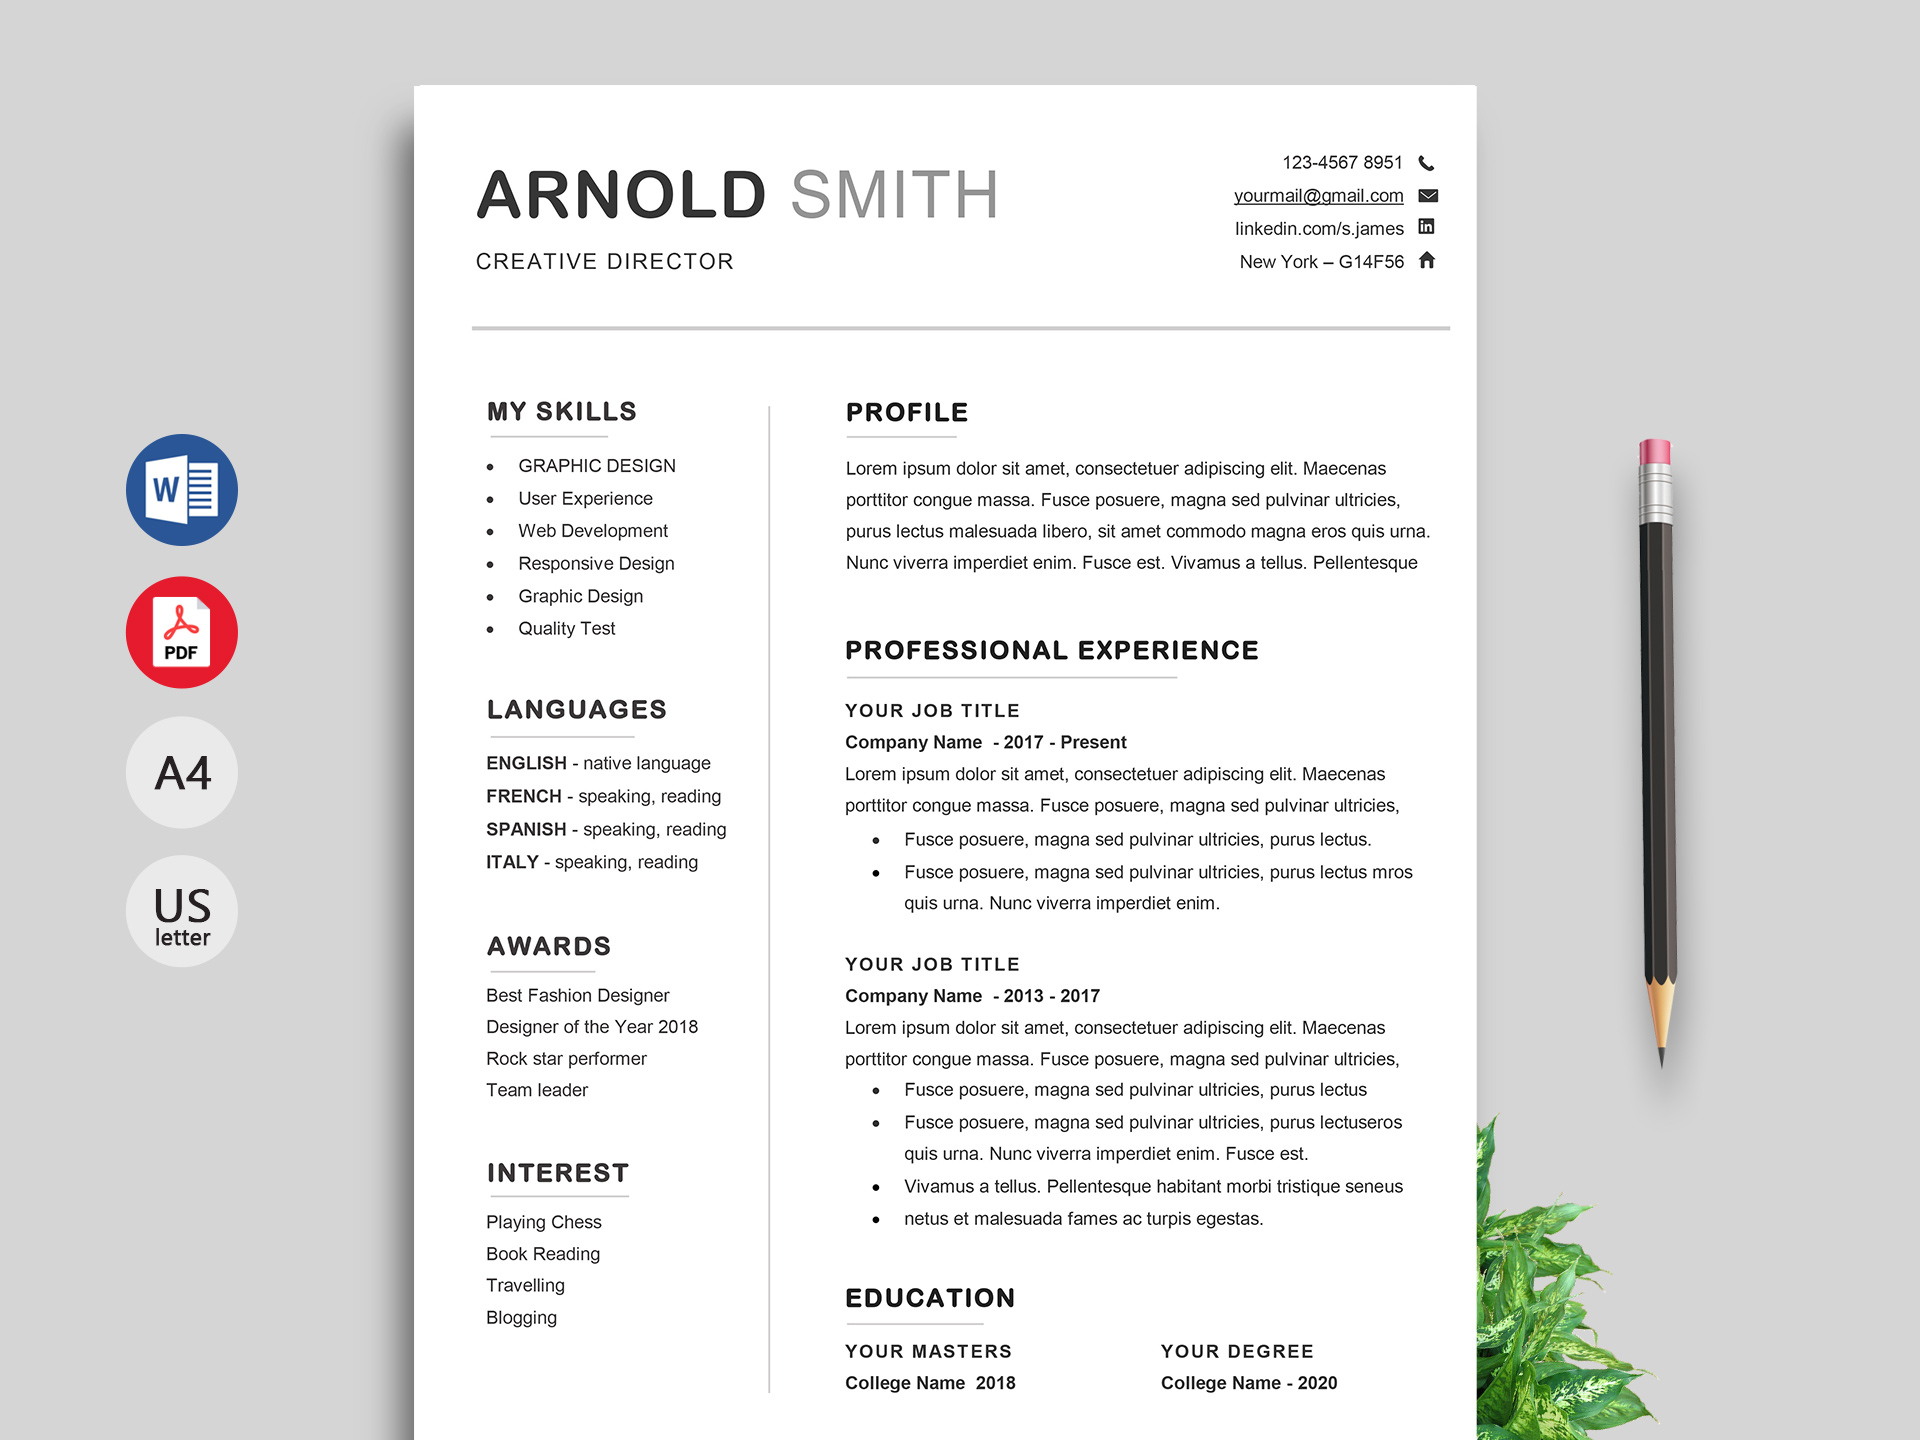 Resume Templates Free Ace Word Resume Template Free Download 1 resume templates free|wikiresume.com